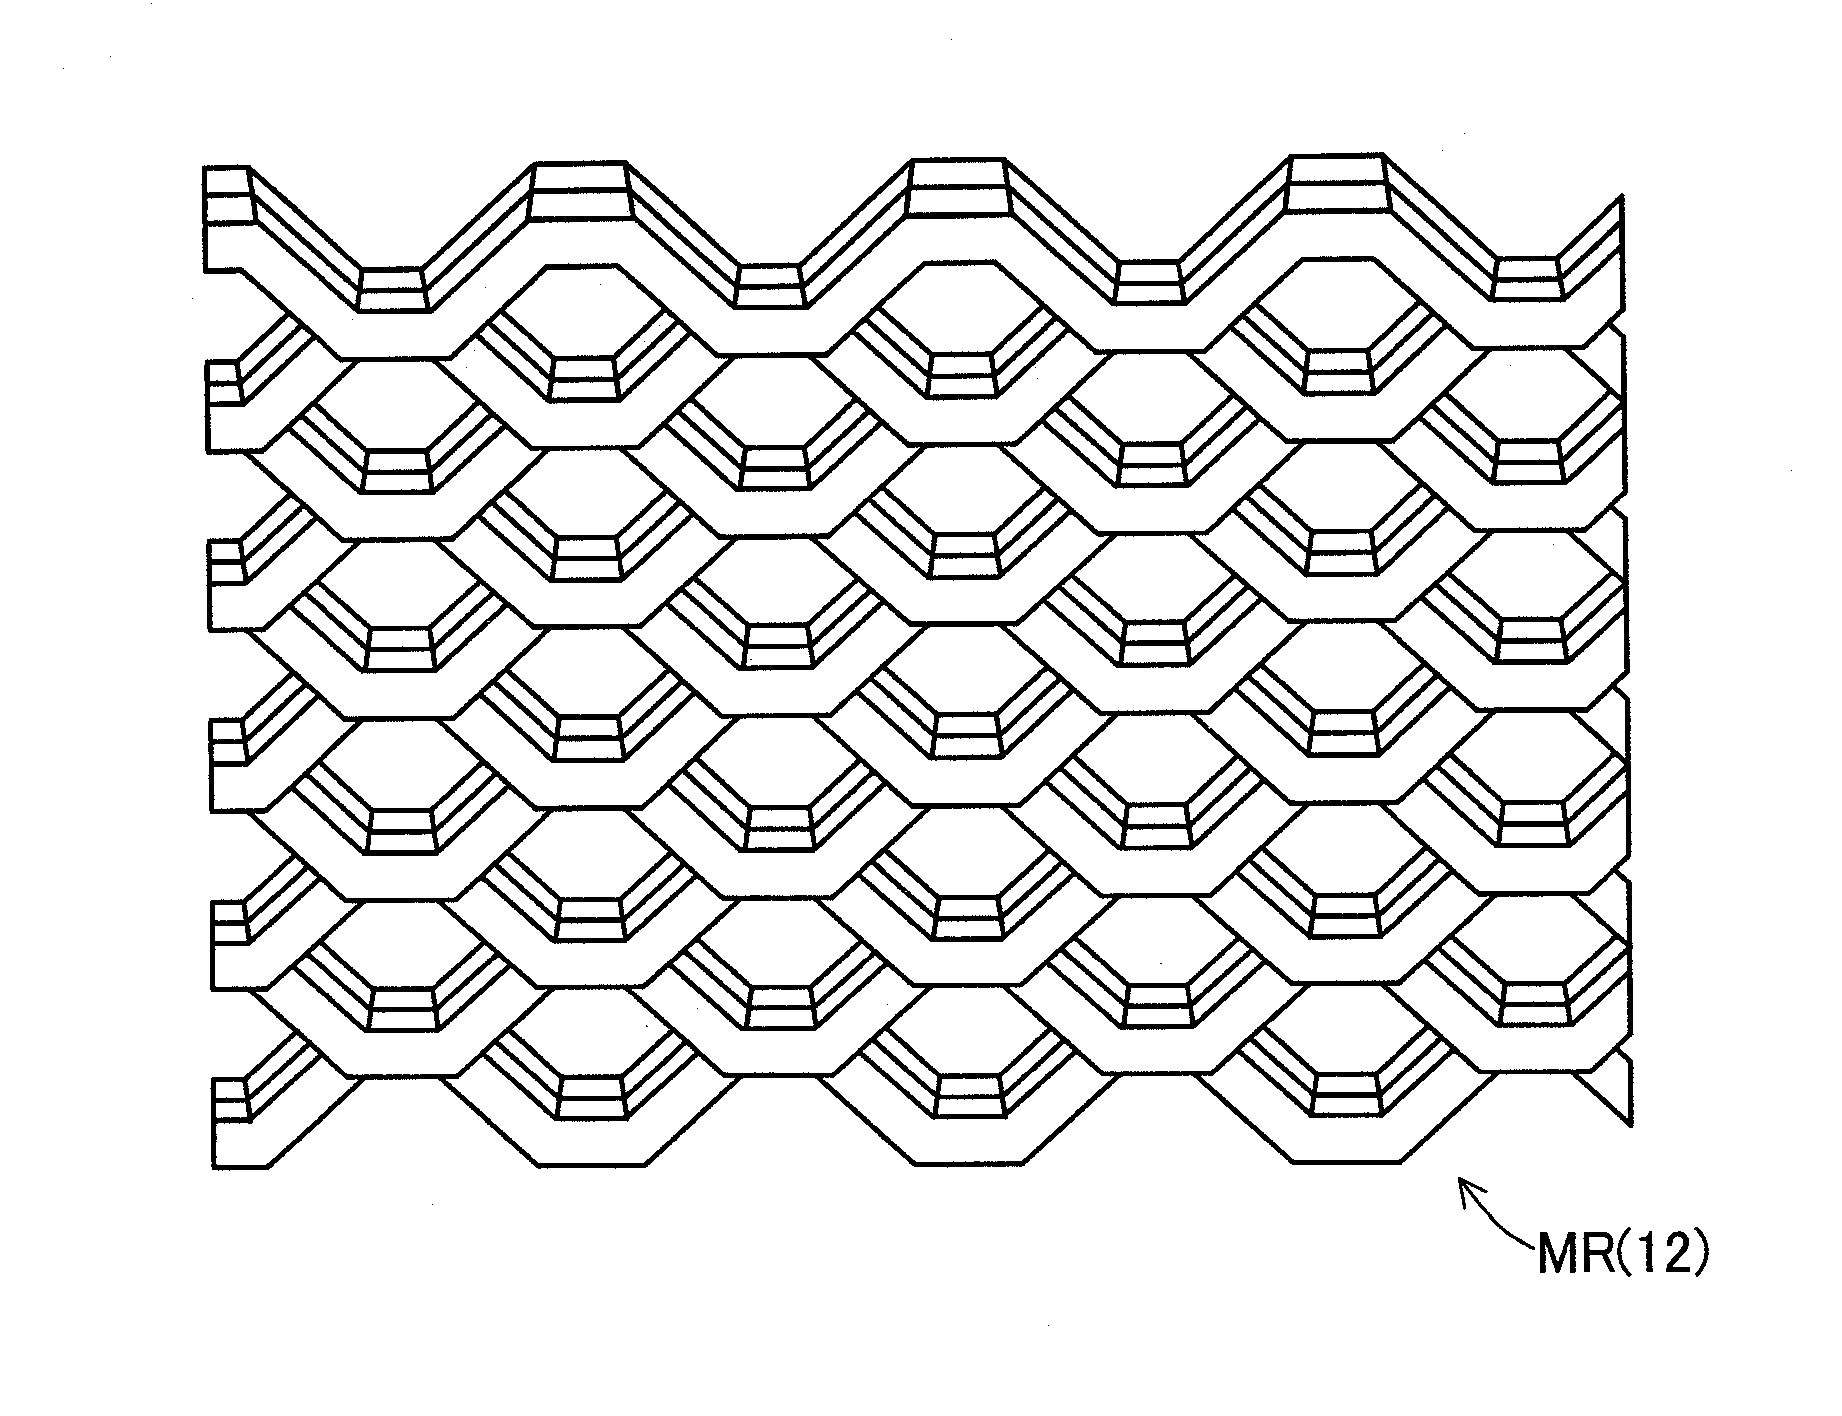 Method of forming gas diffusion layer for fuel cell